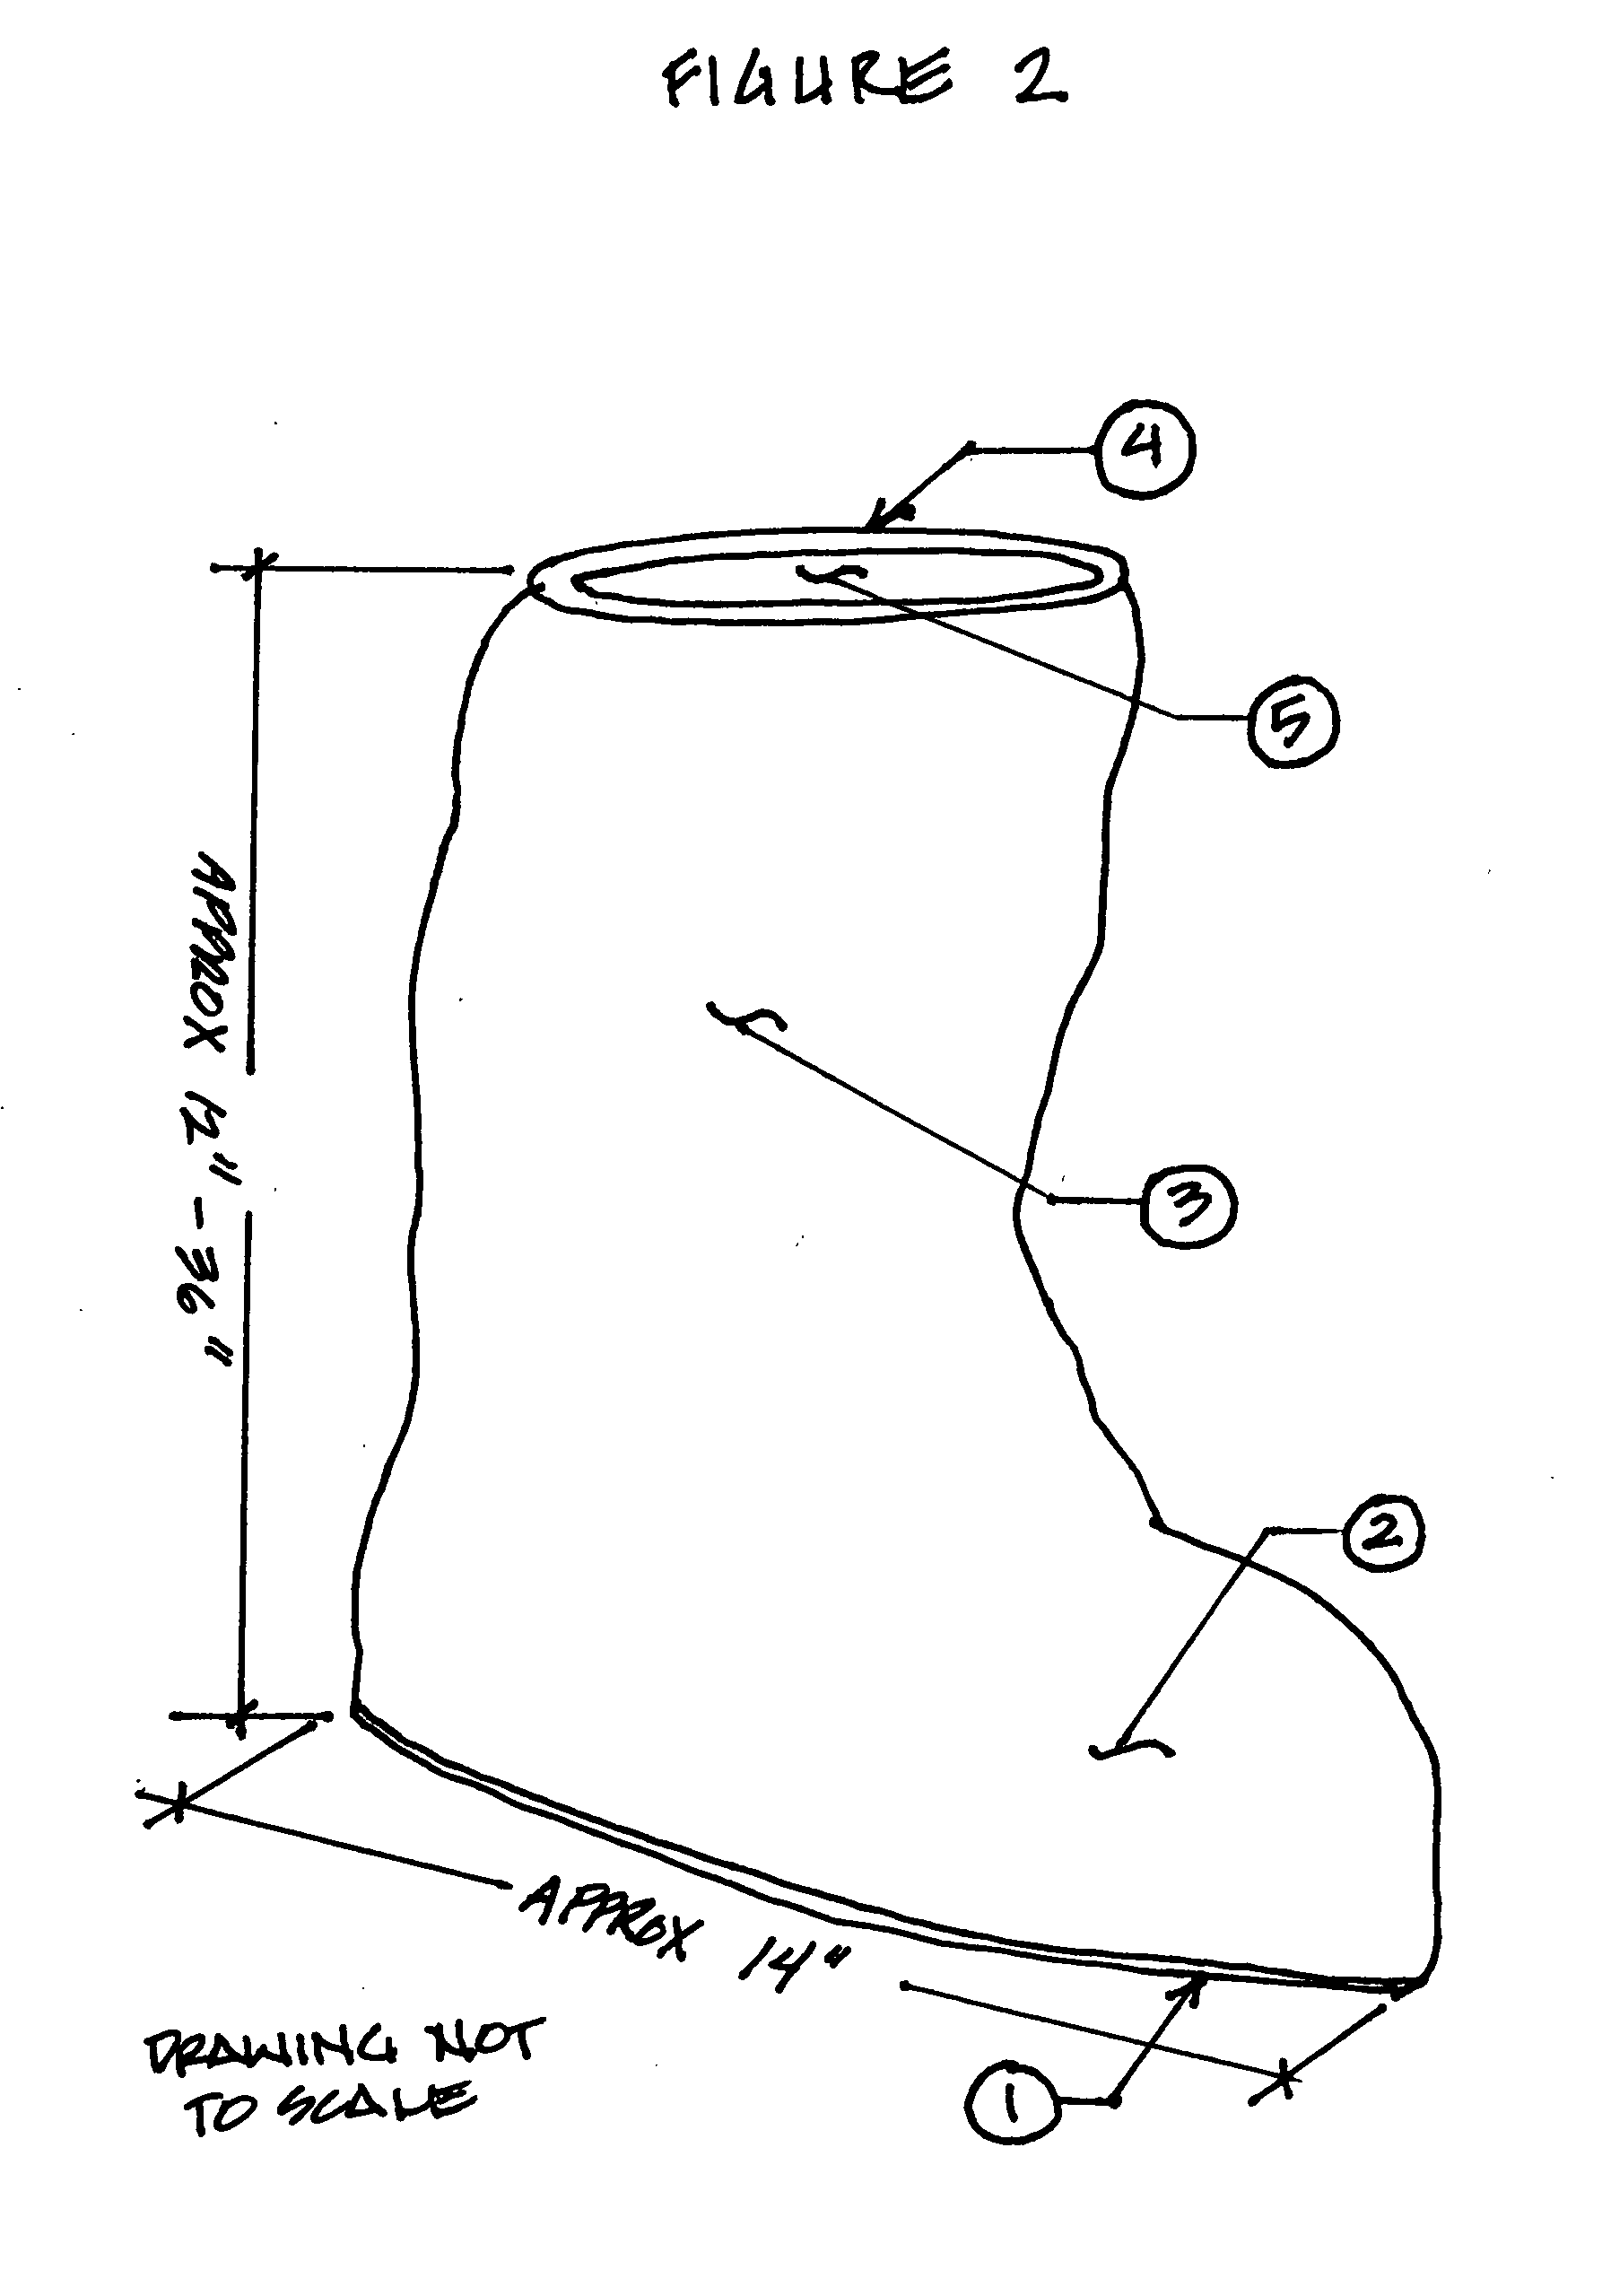 Hunting foot covers and method of use